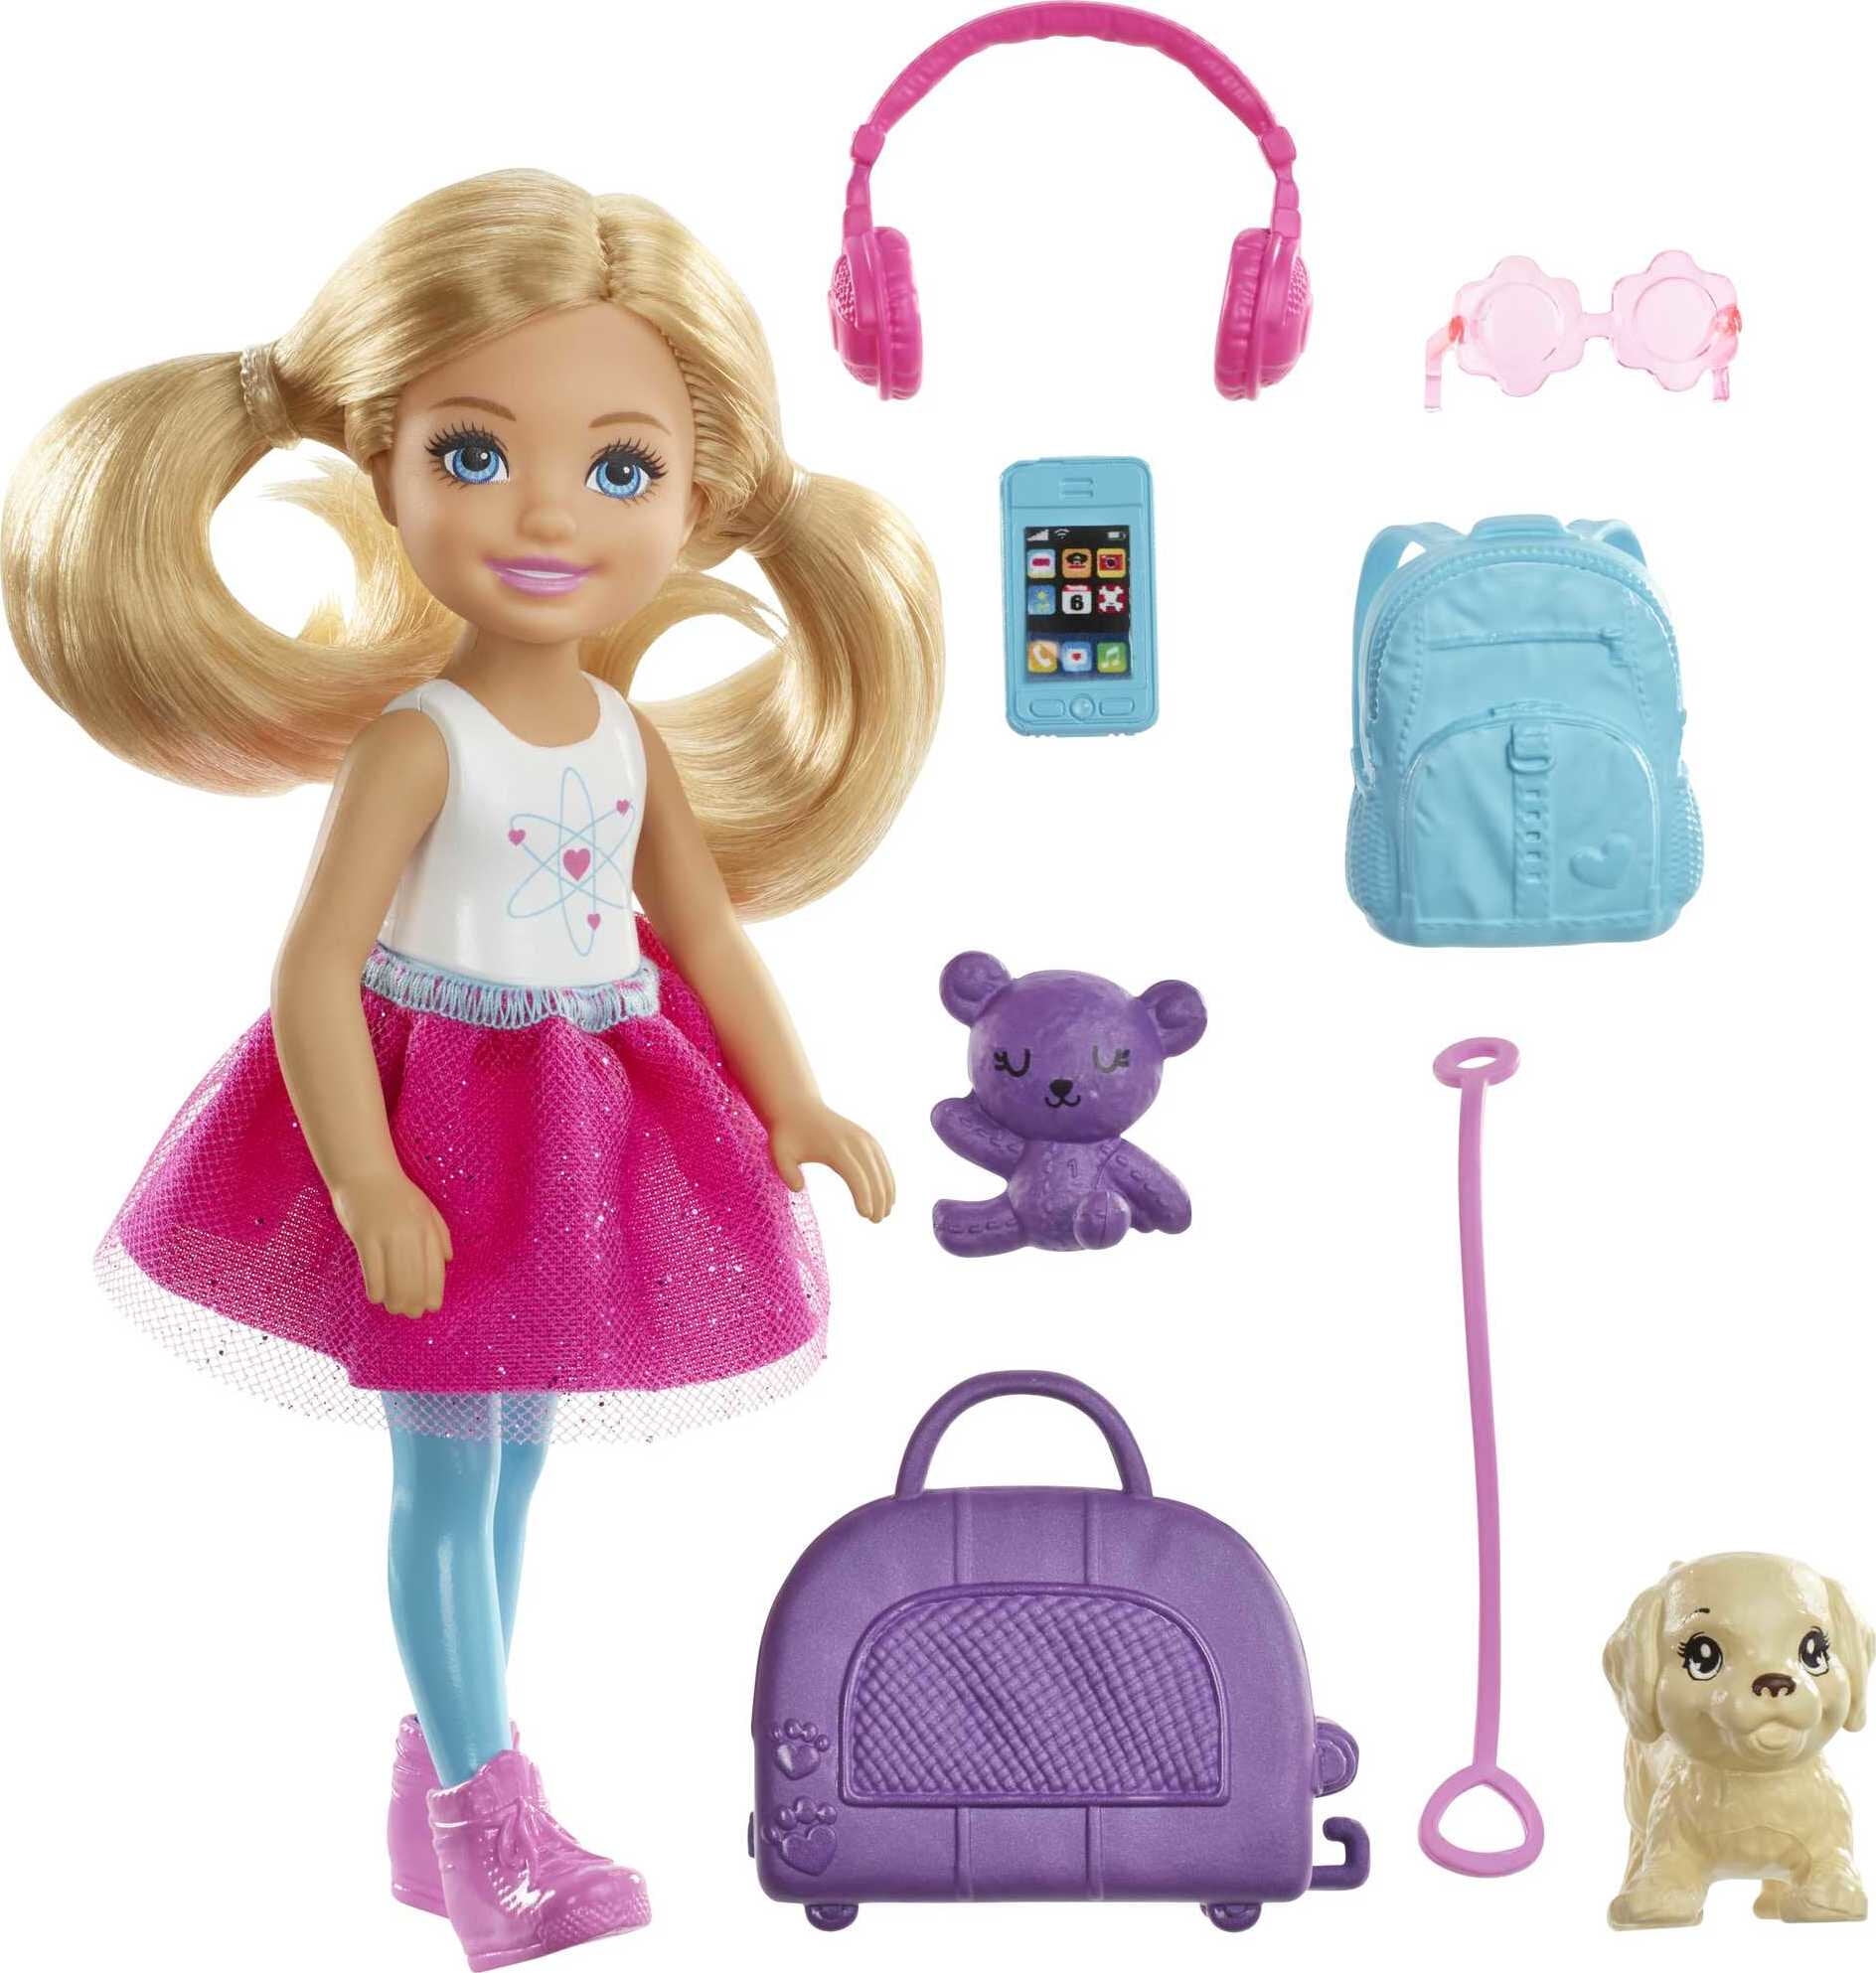 Barbie Dreamhouse Chelsea Doll & Accessories, Travel with Puppy, Blonde Small Doll - Walmart.com